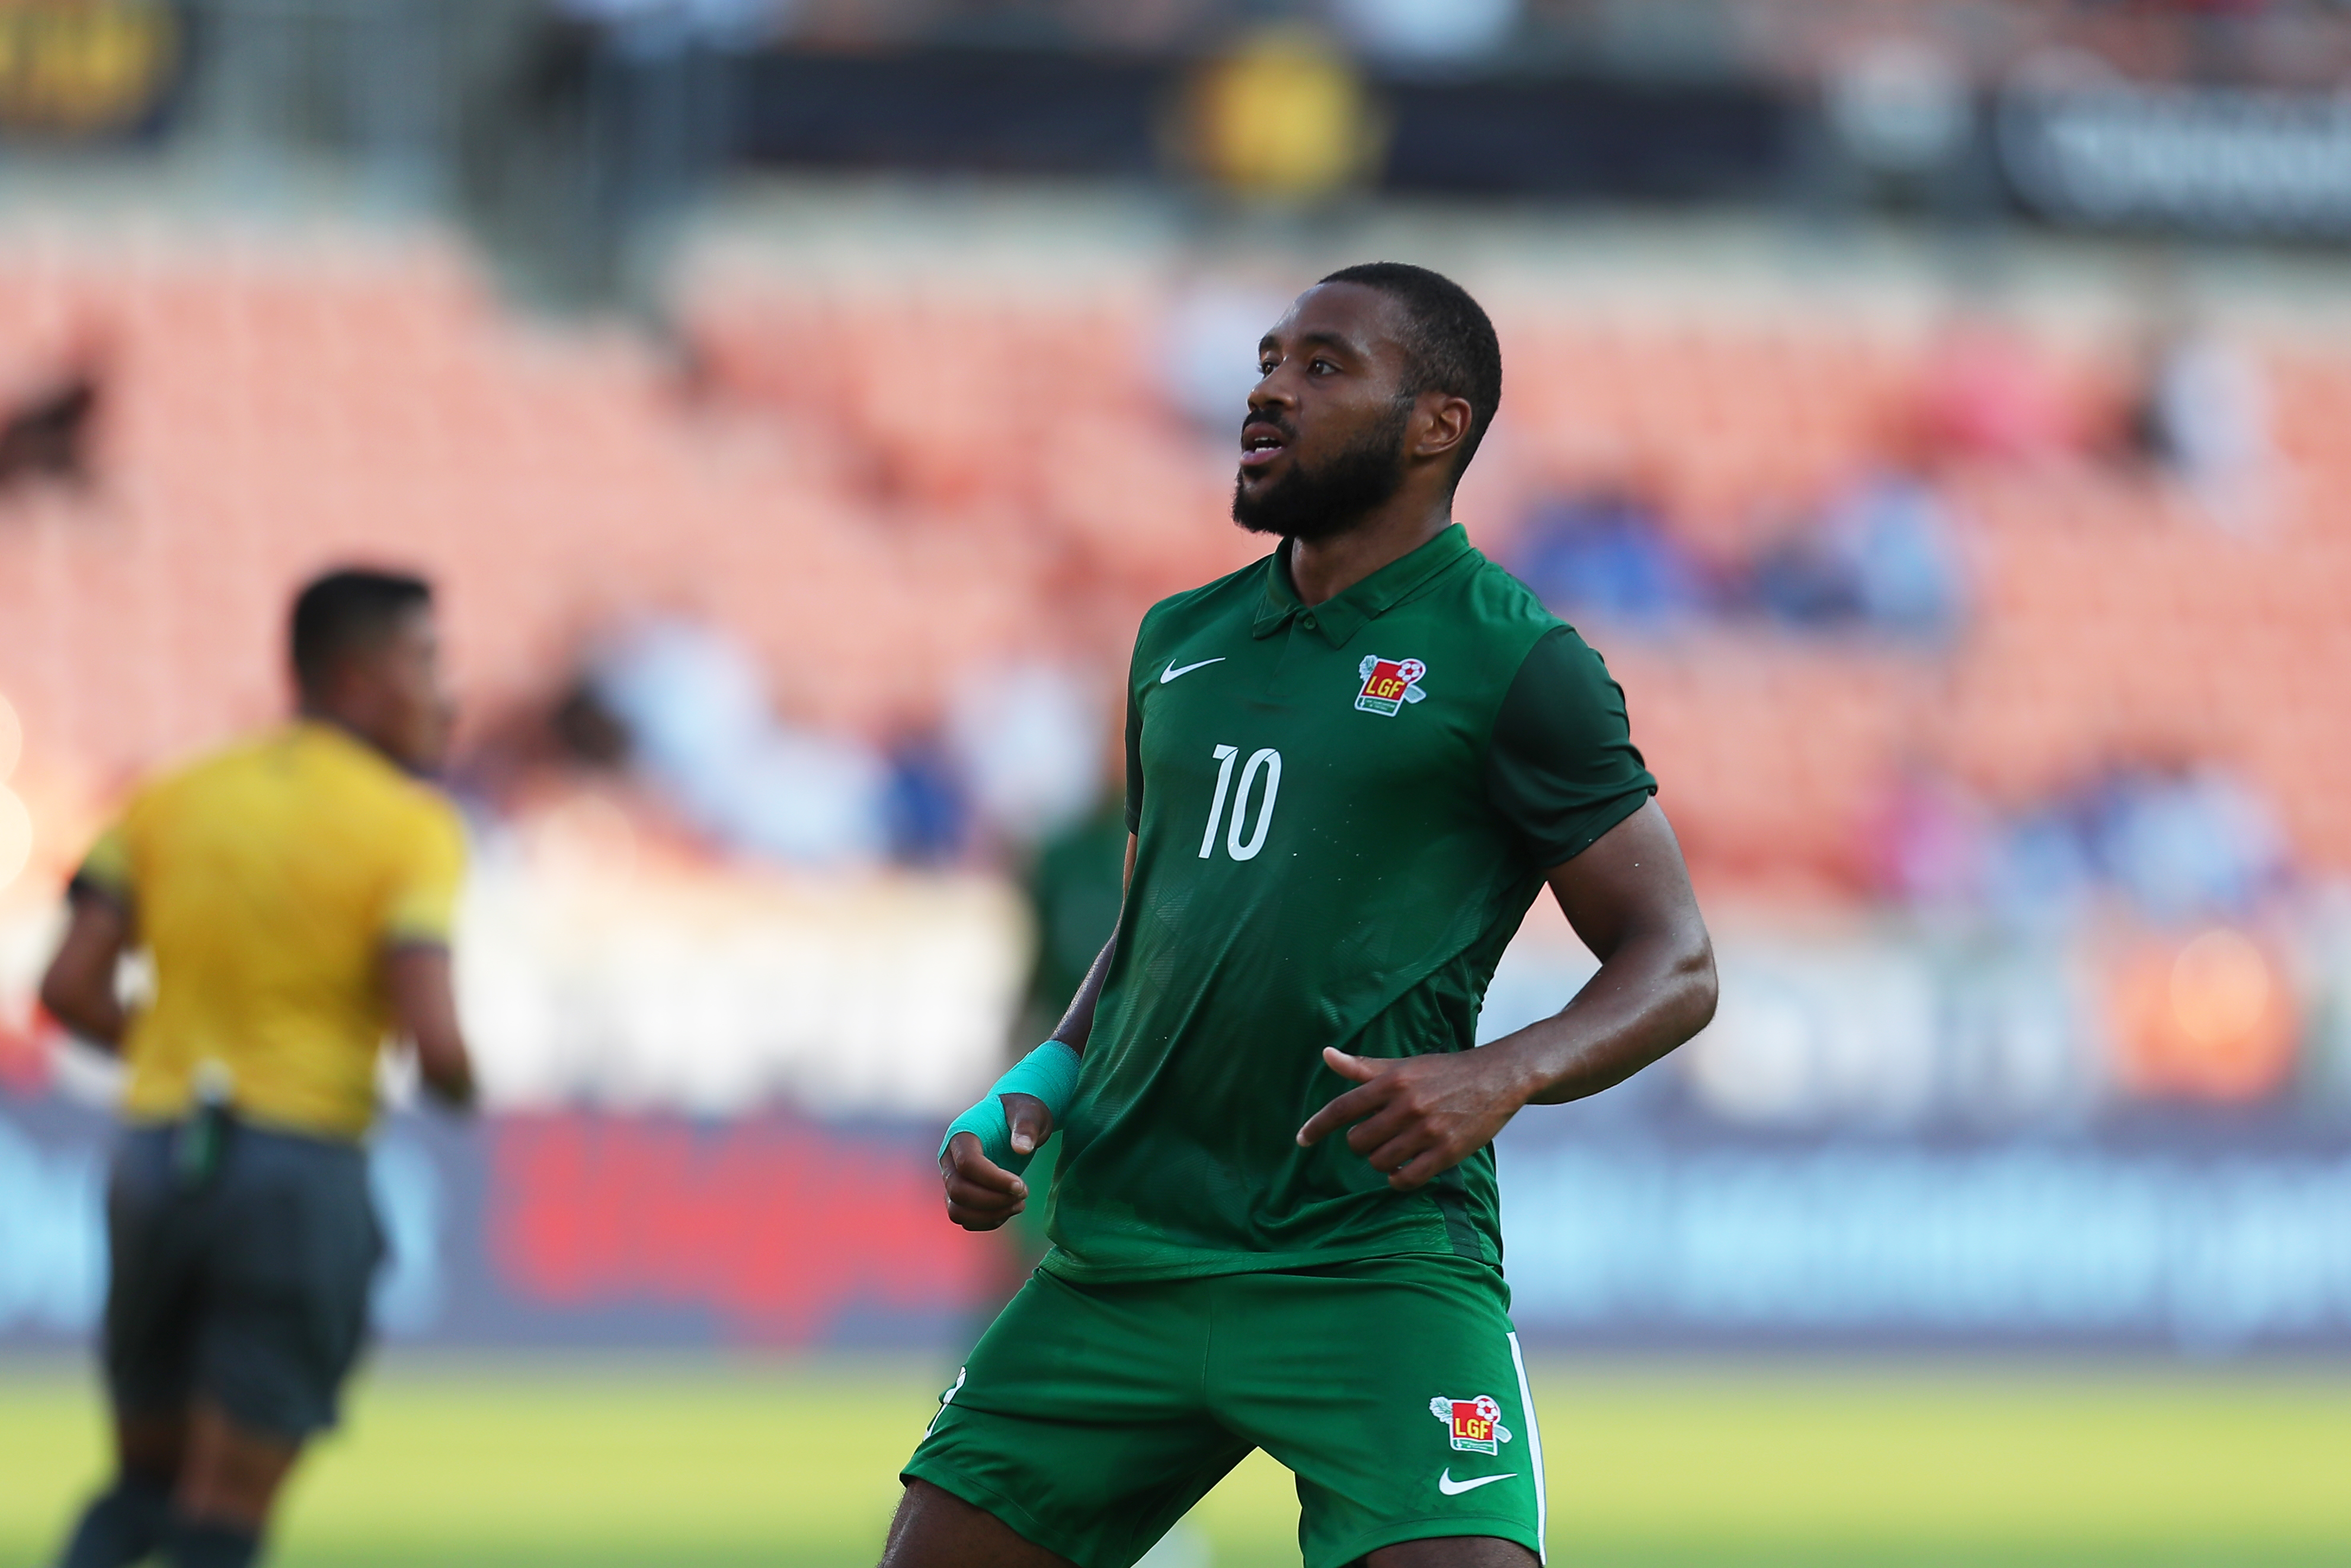 Suriname v Guadeloupe: Group C - 2021 CONCACAF Gold Cup